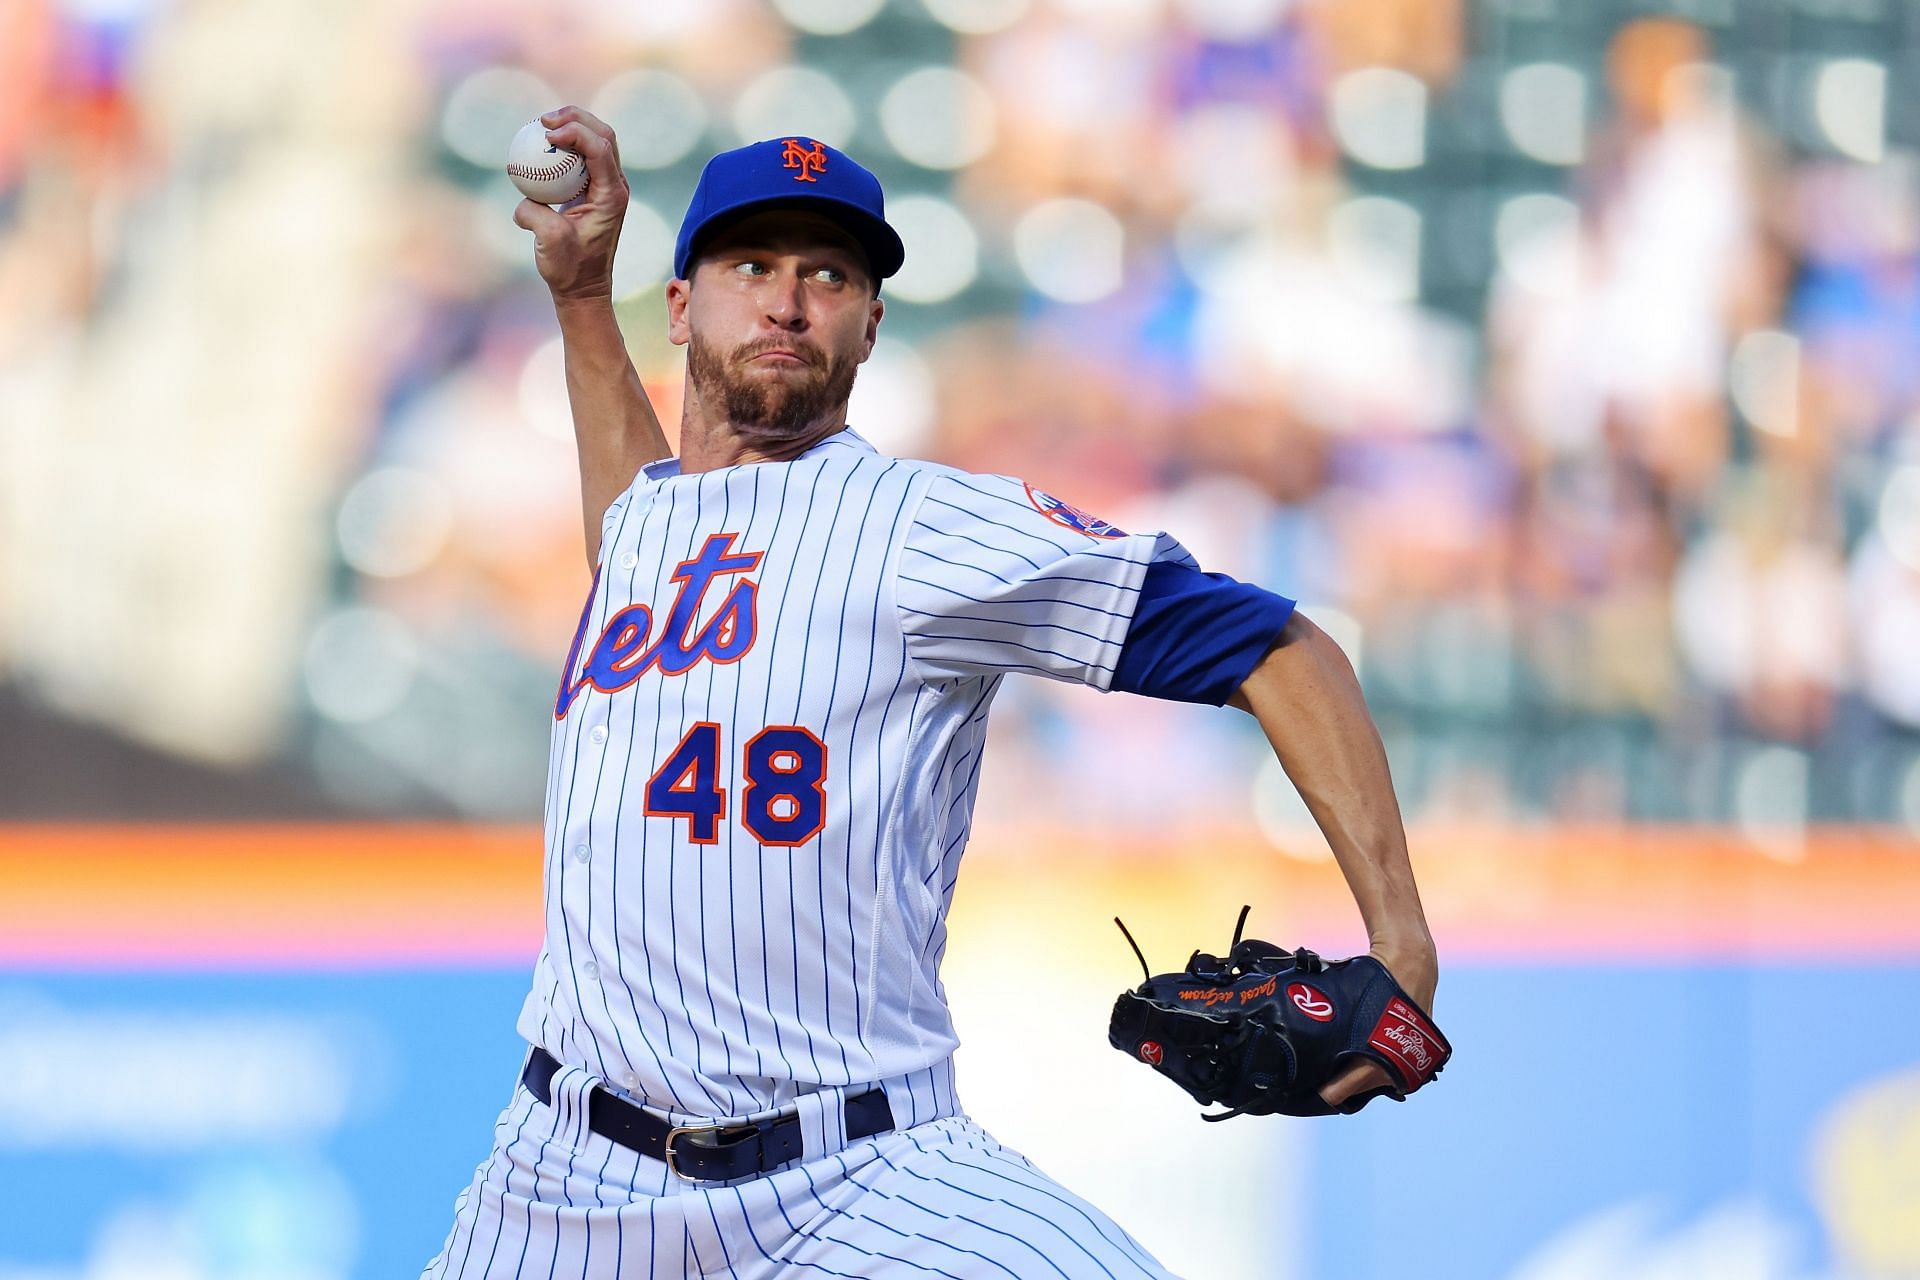 Jacob deGrom pitches in the first inning against the Atlanta Braves at Citi Field.